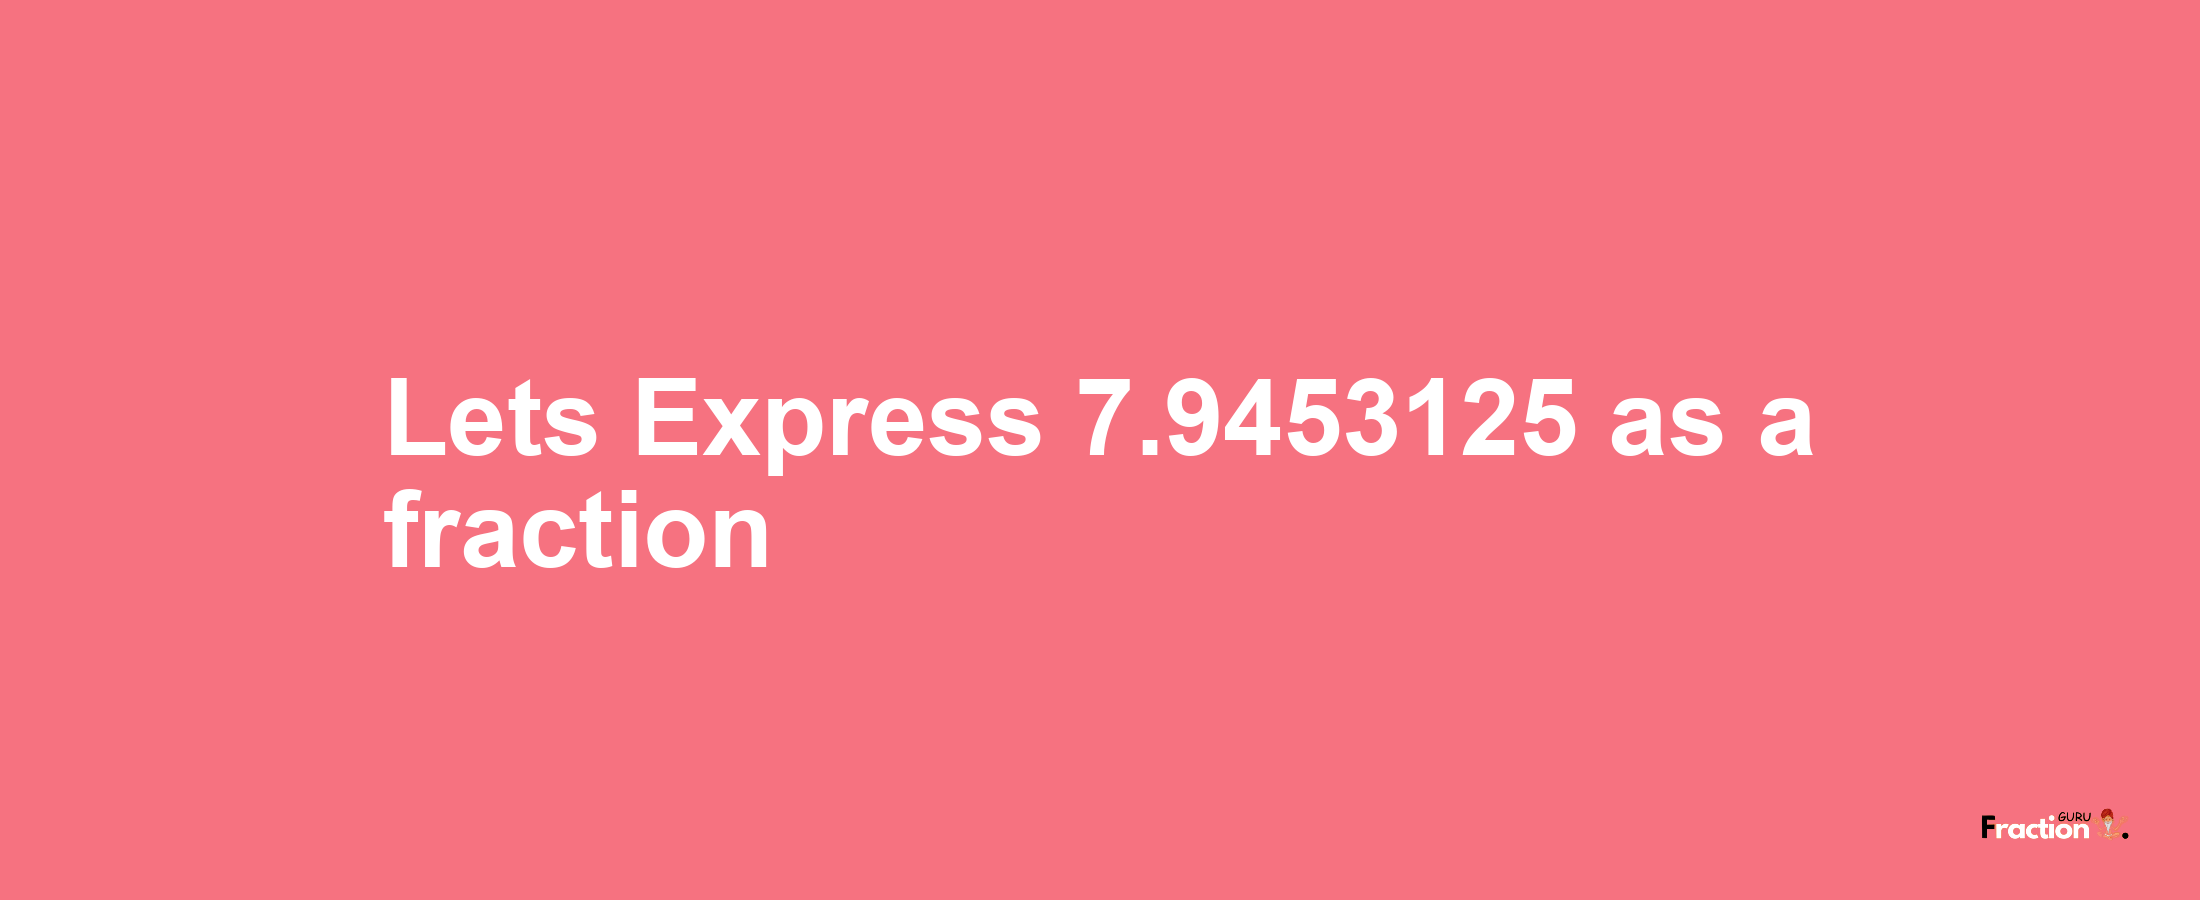 Lets Express 7.9453125 as afraction